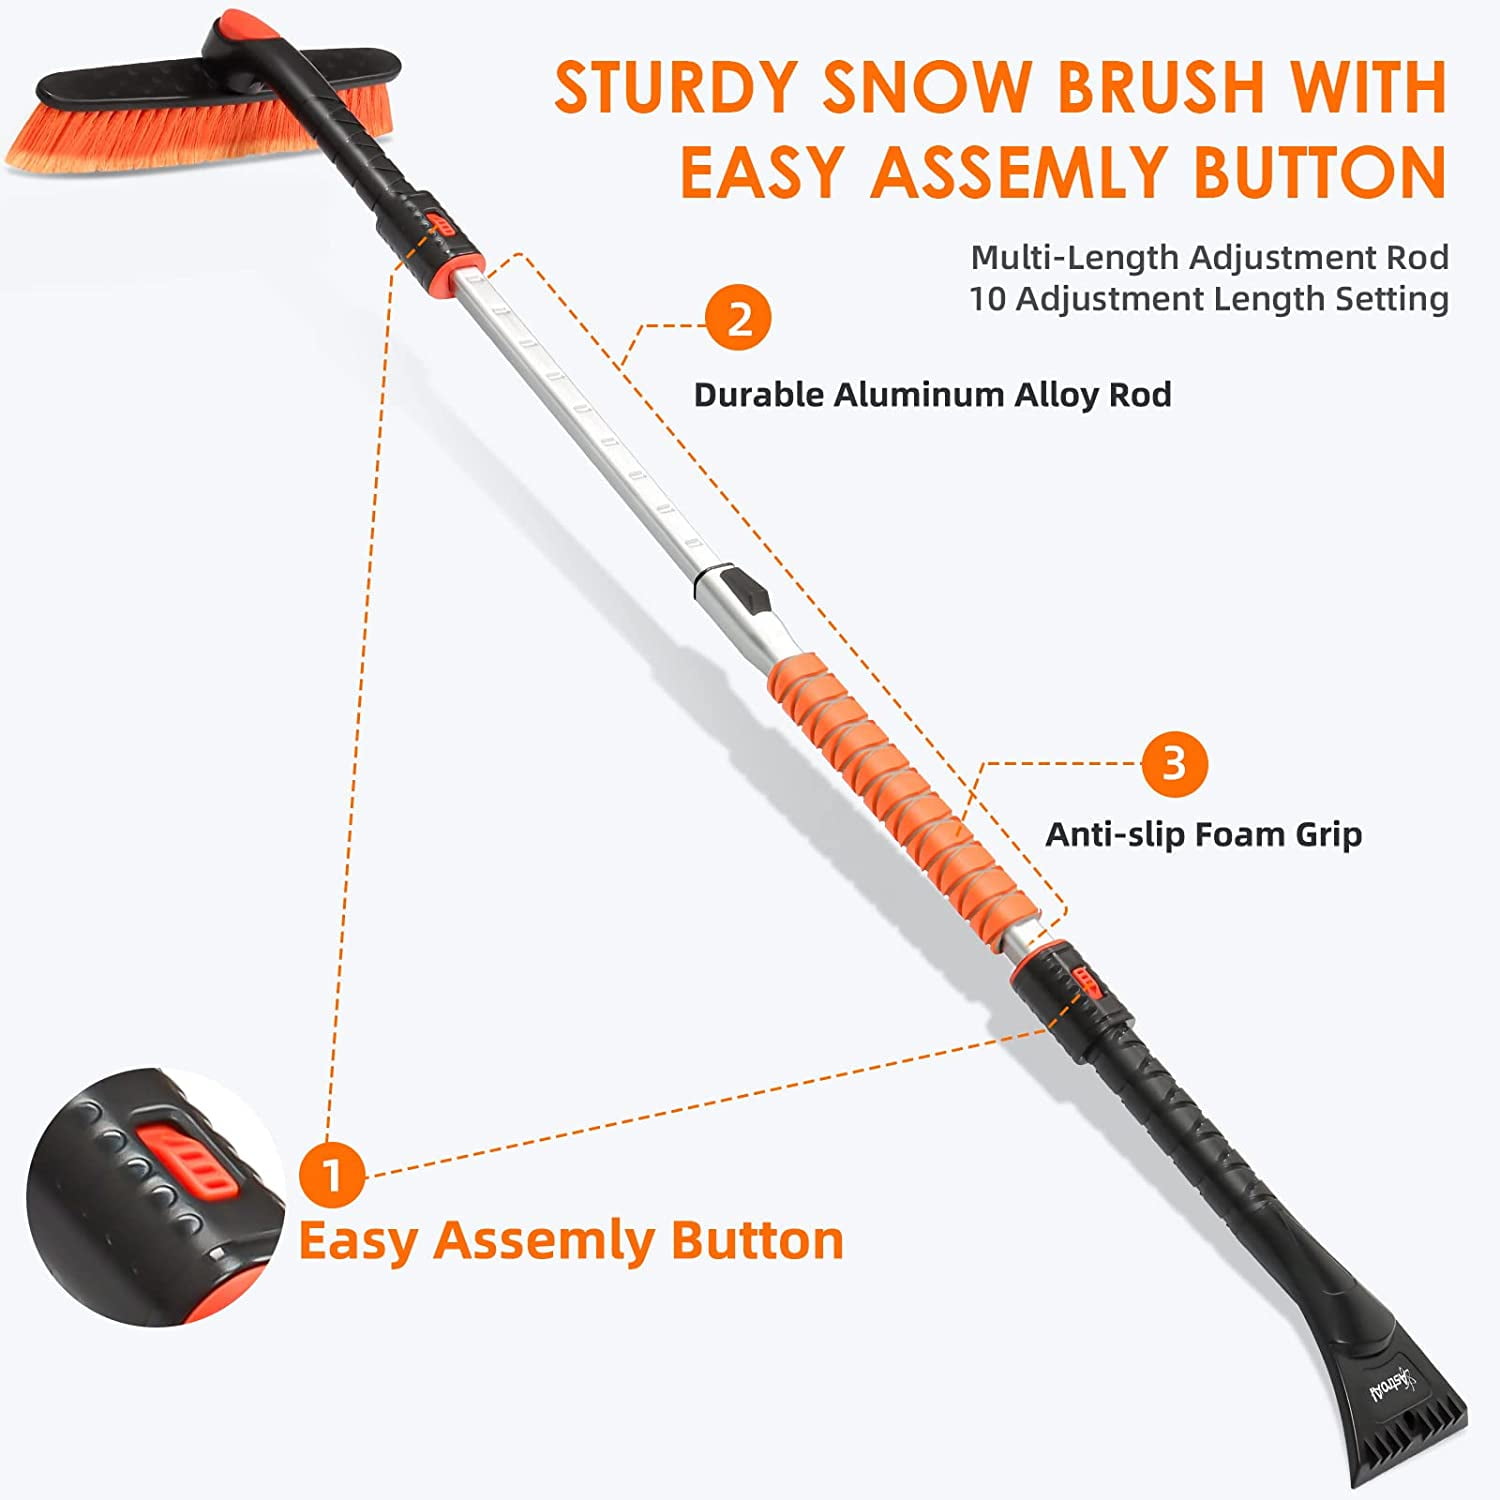 AstroAI 47.2 Ice Scrapers for Car Windshield, 3 in 1 Sturdy Snow Brush  with Squeegee, 10 Adjustable Length Settings, Extendable Aluminum Handle,  270°